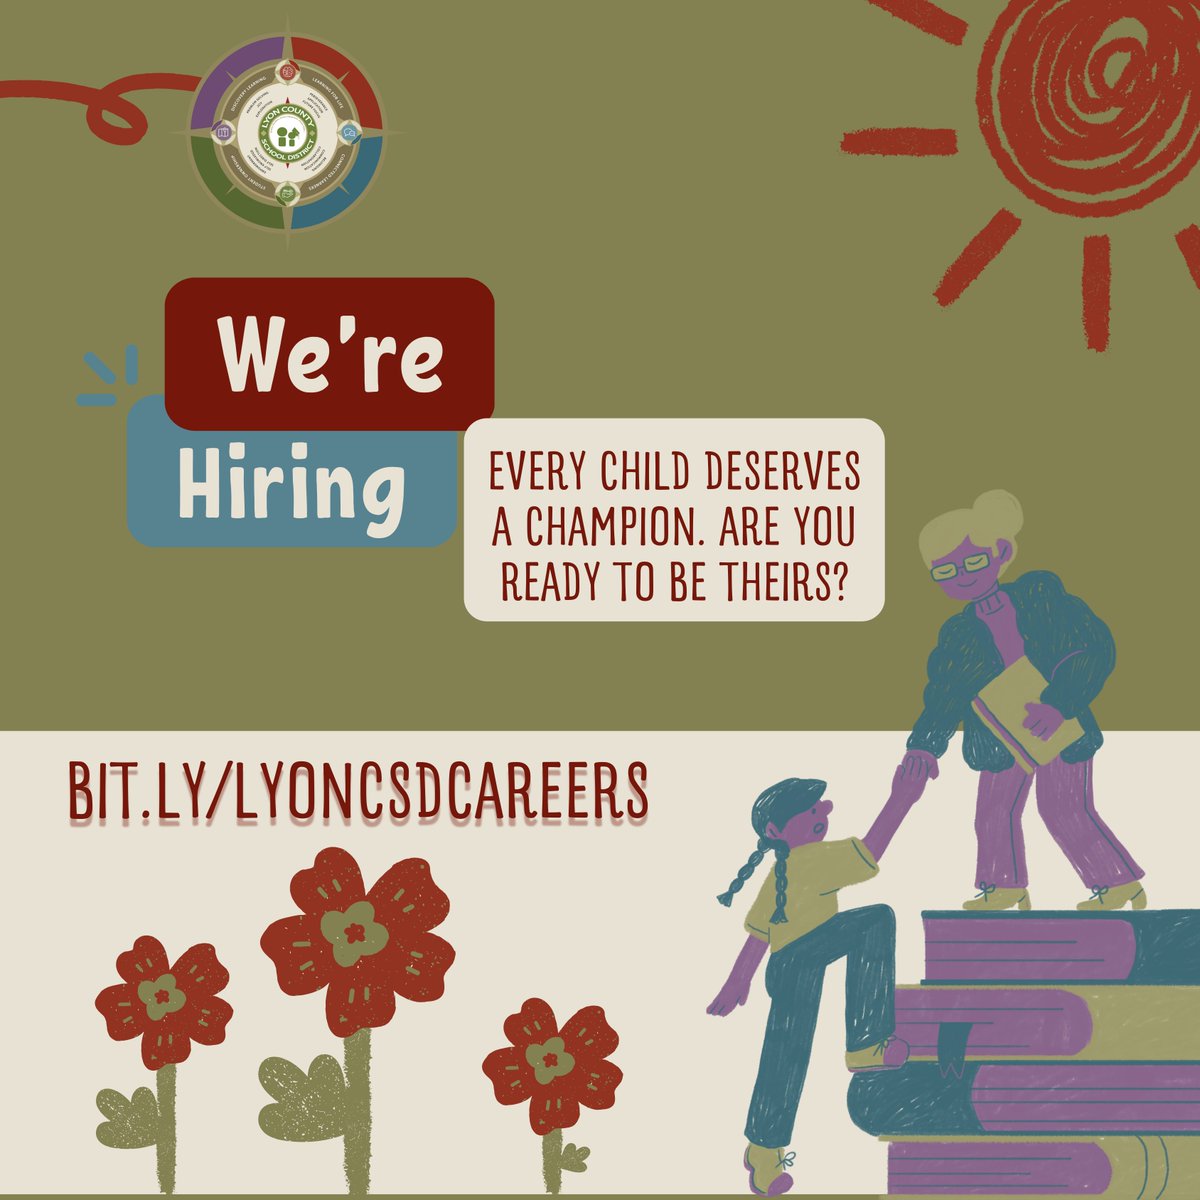 🌟👩‍🏫 Every child deserves a champion. Are you ready to be theirs? Lyon County School District is seeking dedicated teachers to support and empower our students. Join our team and make a difference! Apply now: bit.ly/lyoncsdcareers #ChampionForChildren #JoinTheTeam